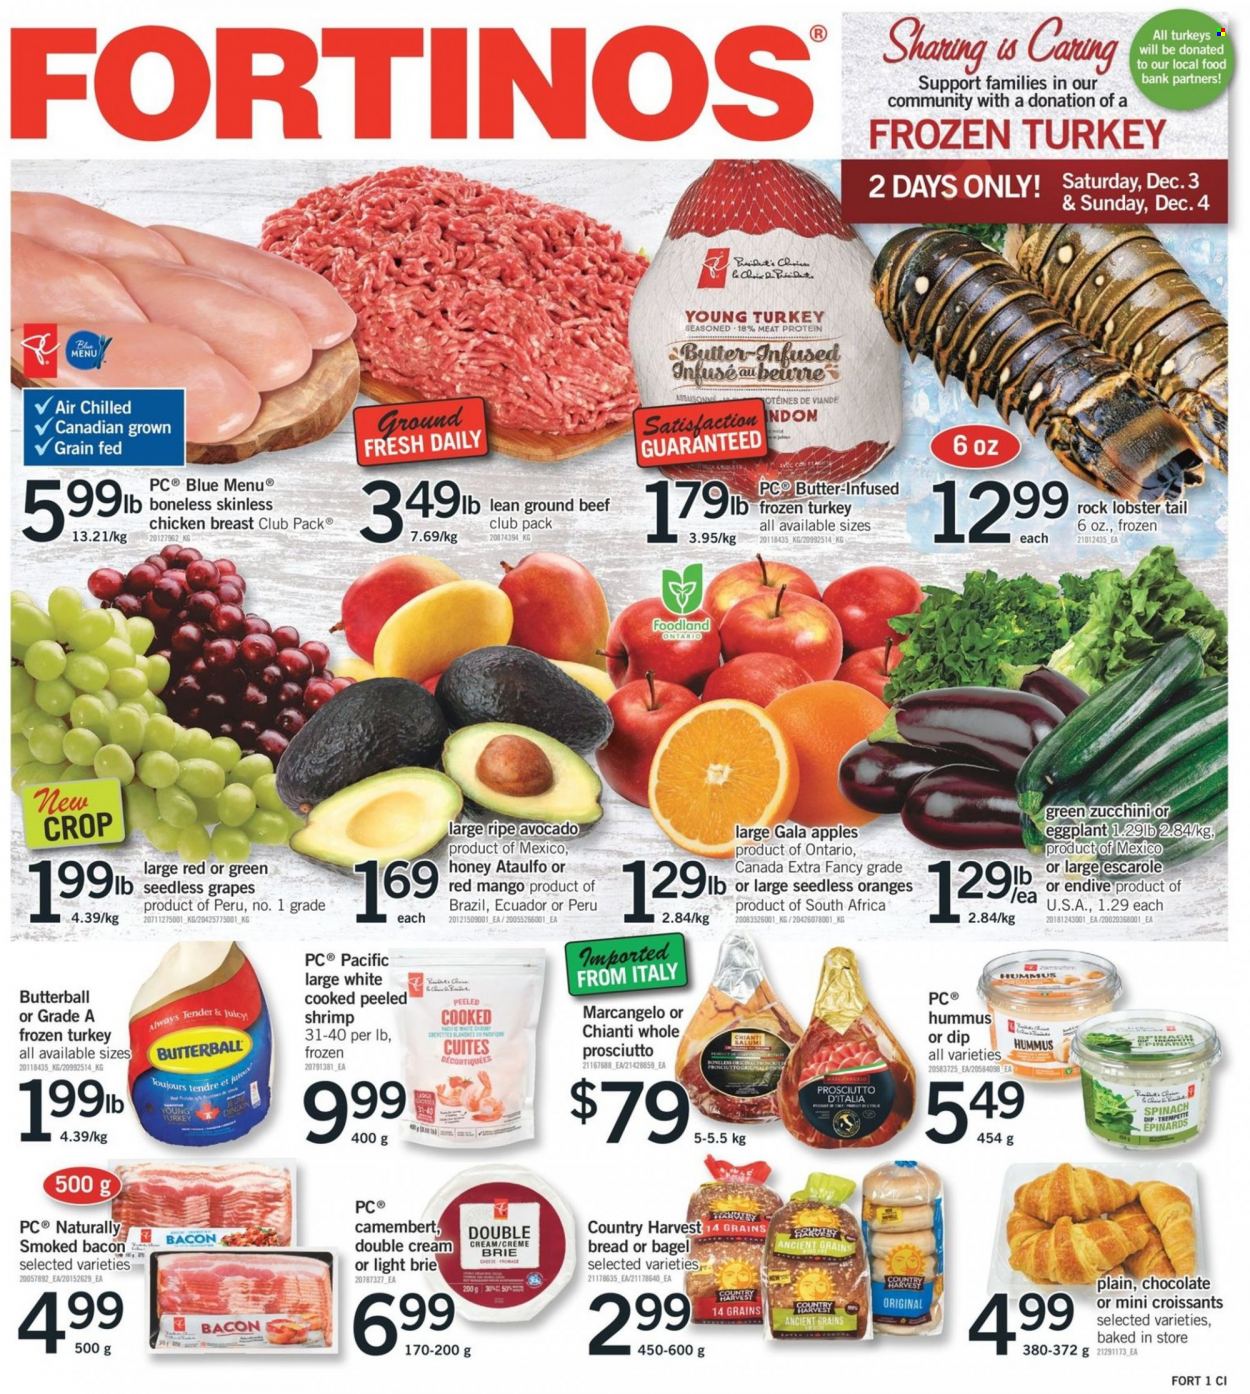 thumbnail - Fortinos Flyer - December 01, 2022 - December 07, 2022 - Sales products - bagels, bread, croissant, spinach, zucchini, eggplant, apples, avocado, Gala, grapes, mango, seedless grapes, oranges, lobster, lobster tail, bacon, Butterball, turkey bacon, prosciutto, hummus, cheese, brie, Président, dip, spinach dip, Country Harvest, chocolate, honey, whole turkey, chicken breasts, chicken, beef meat, ground beef, camembert, endive. Page 1.